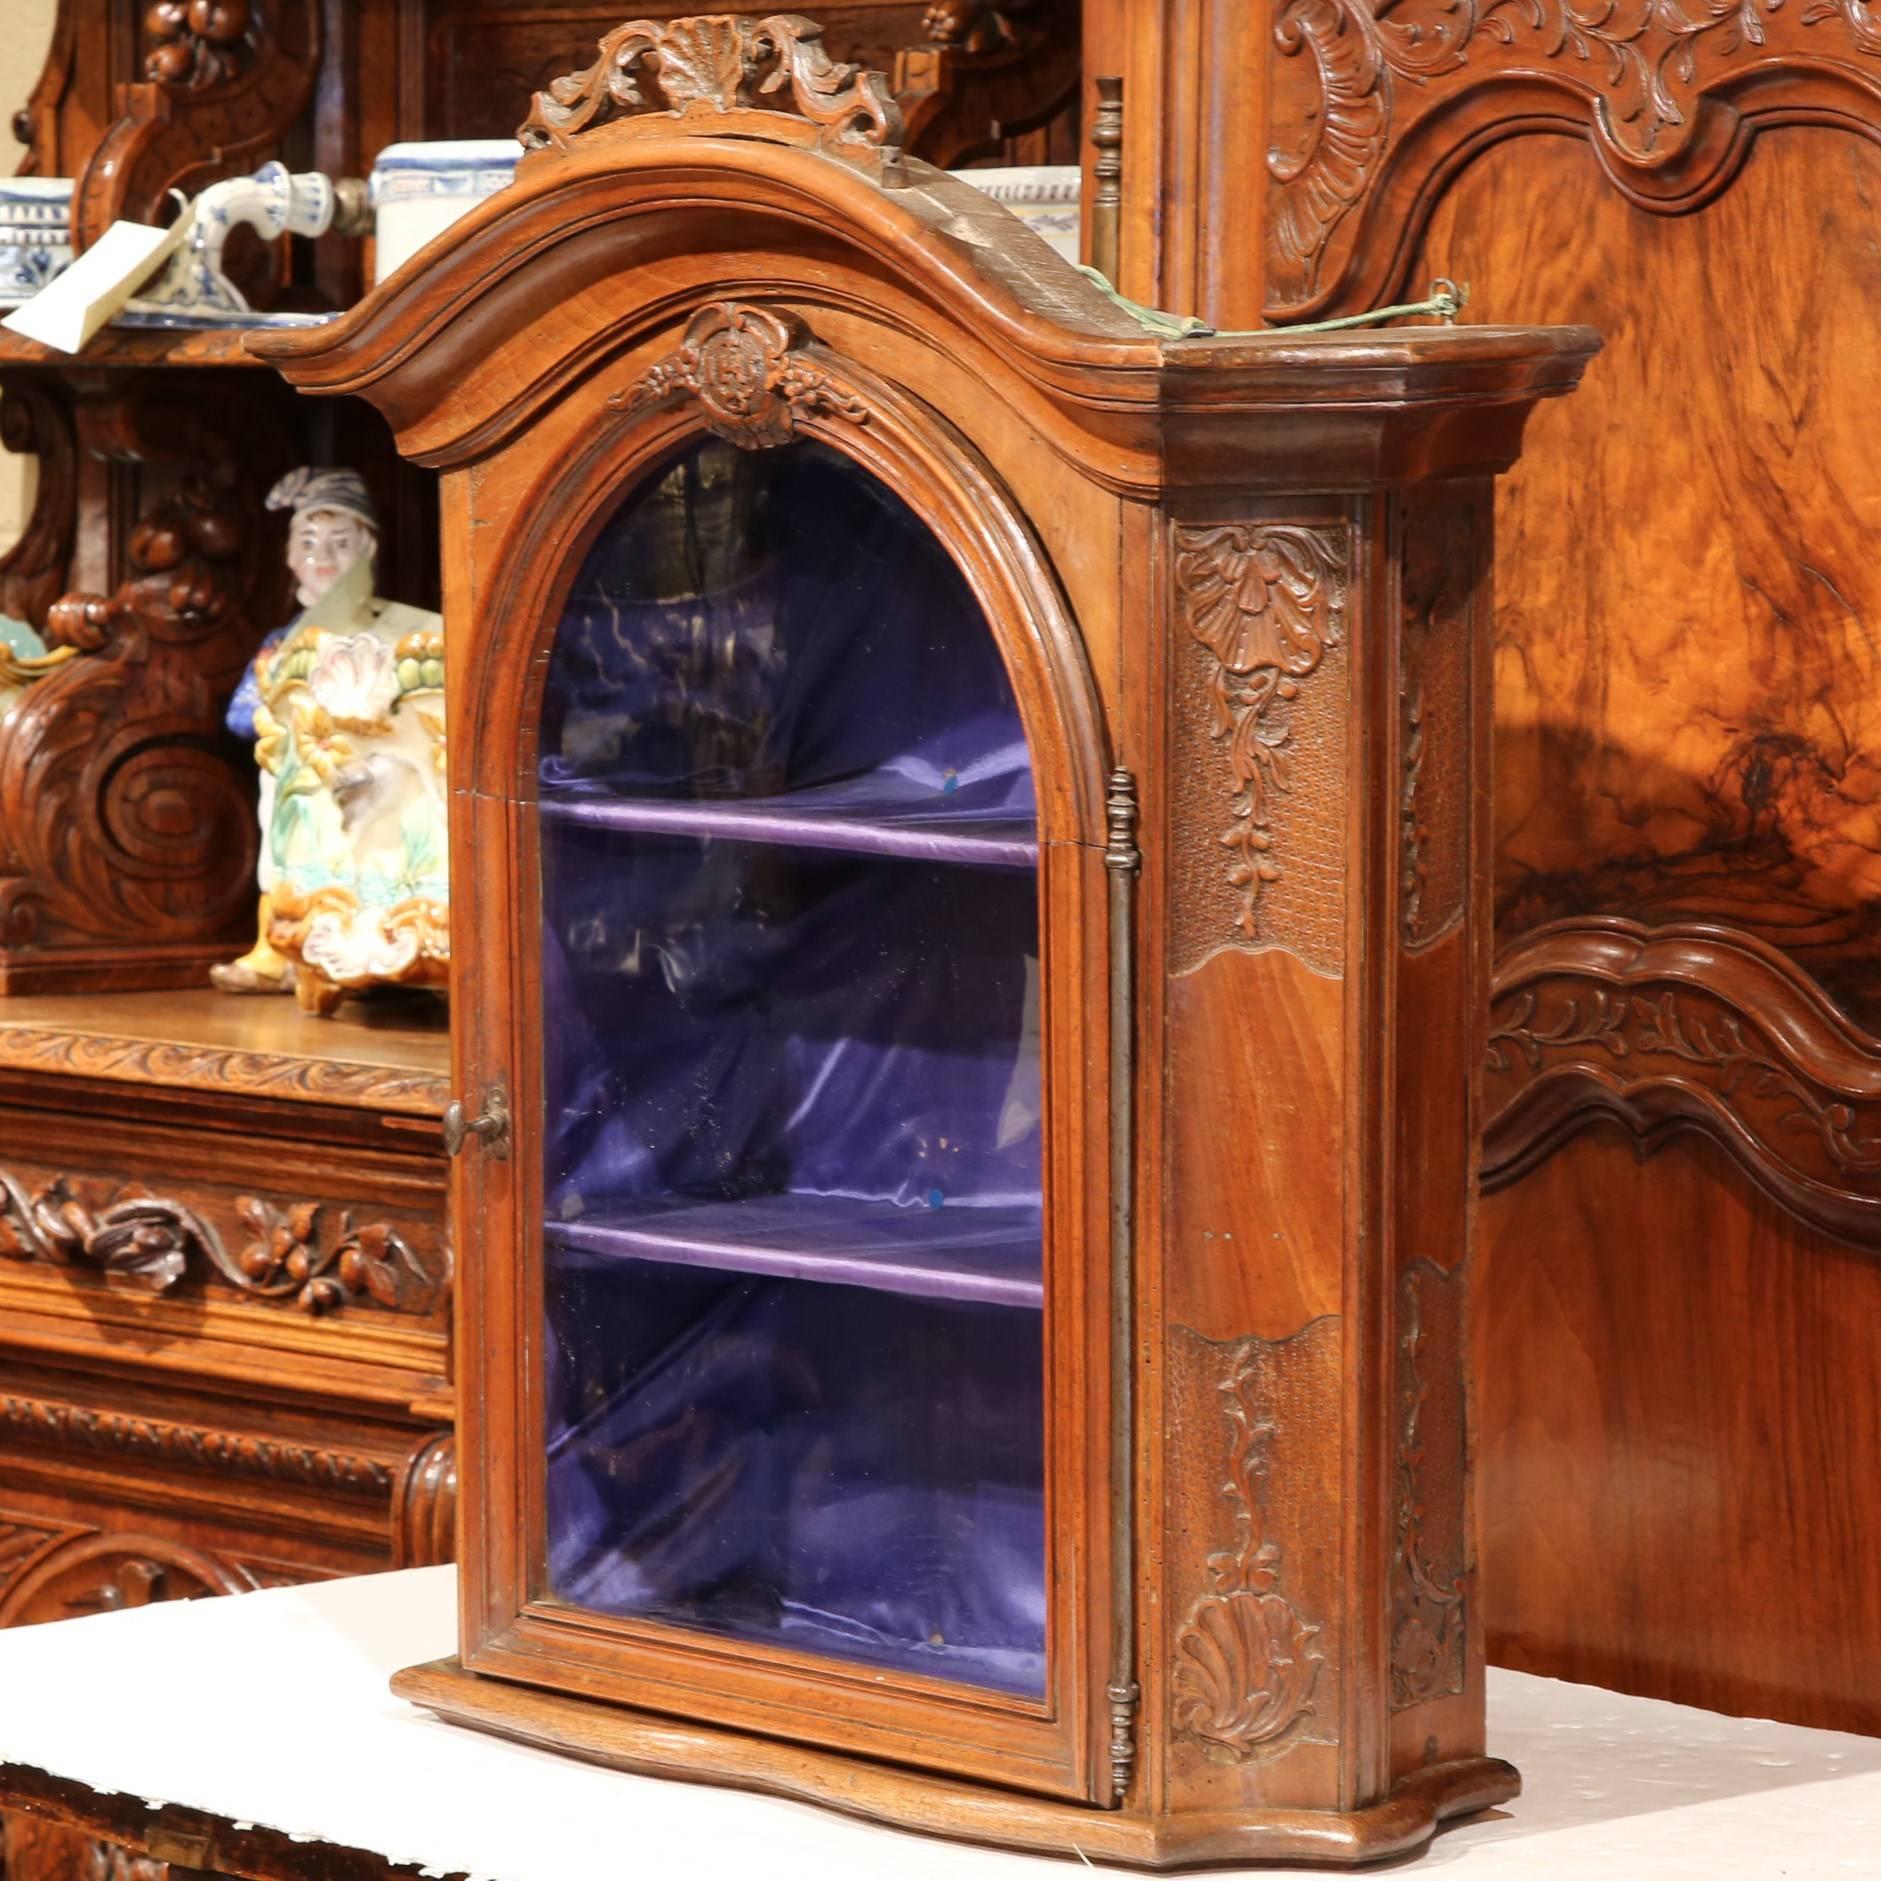 Elegant and narrow antique hanging vitrine from France, circa 1780; with fine carving on both sides and on top of the door, nicely shaped bonnet top, original hardware and glass. Removable blue silk inside. Beautiful and rich patina, excellent